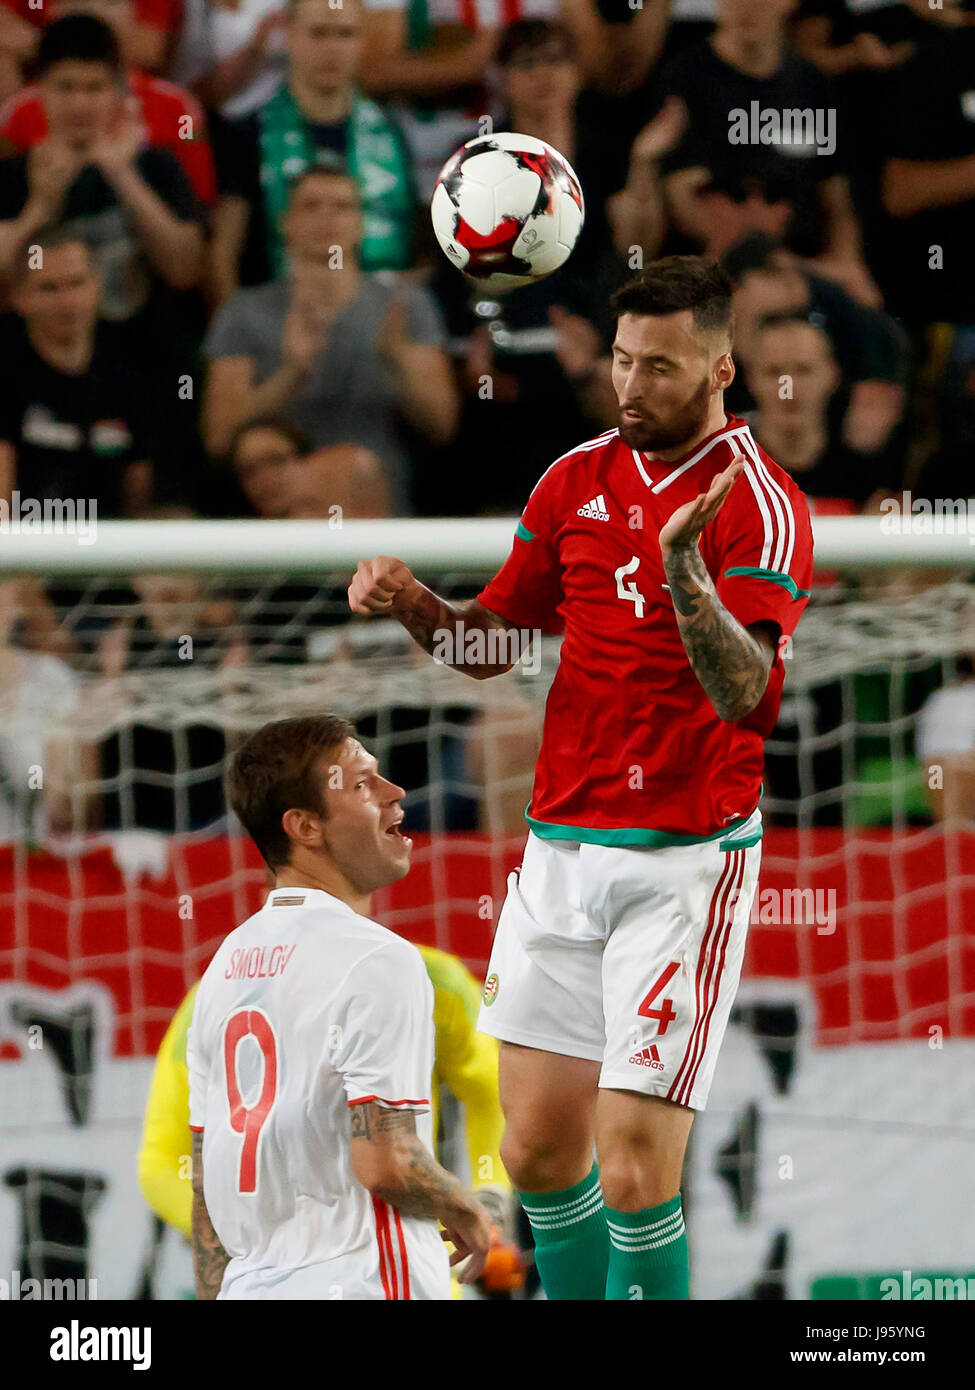 Budapest, Hungary. 05th June, 2017. BUDAPEST, HUNGARY - JUNE 5: Tamas Kadar #4 of Hungary wins the ball in the air from Fedor Smolov #9 of Russia during the International Friendly match between Hungary and Russia at Groupama Arena on June 5, 2017 in Budapest, Hungary. Credit: Laszlo Szirtesi/Alamy Live News Stock Photo